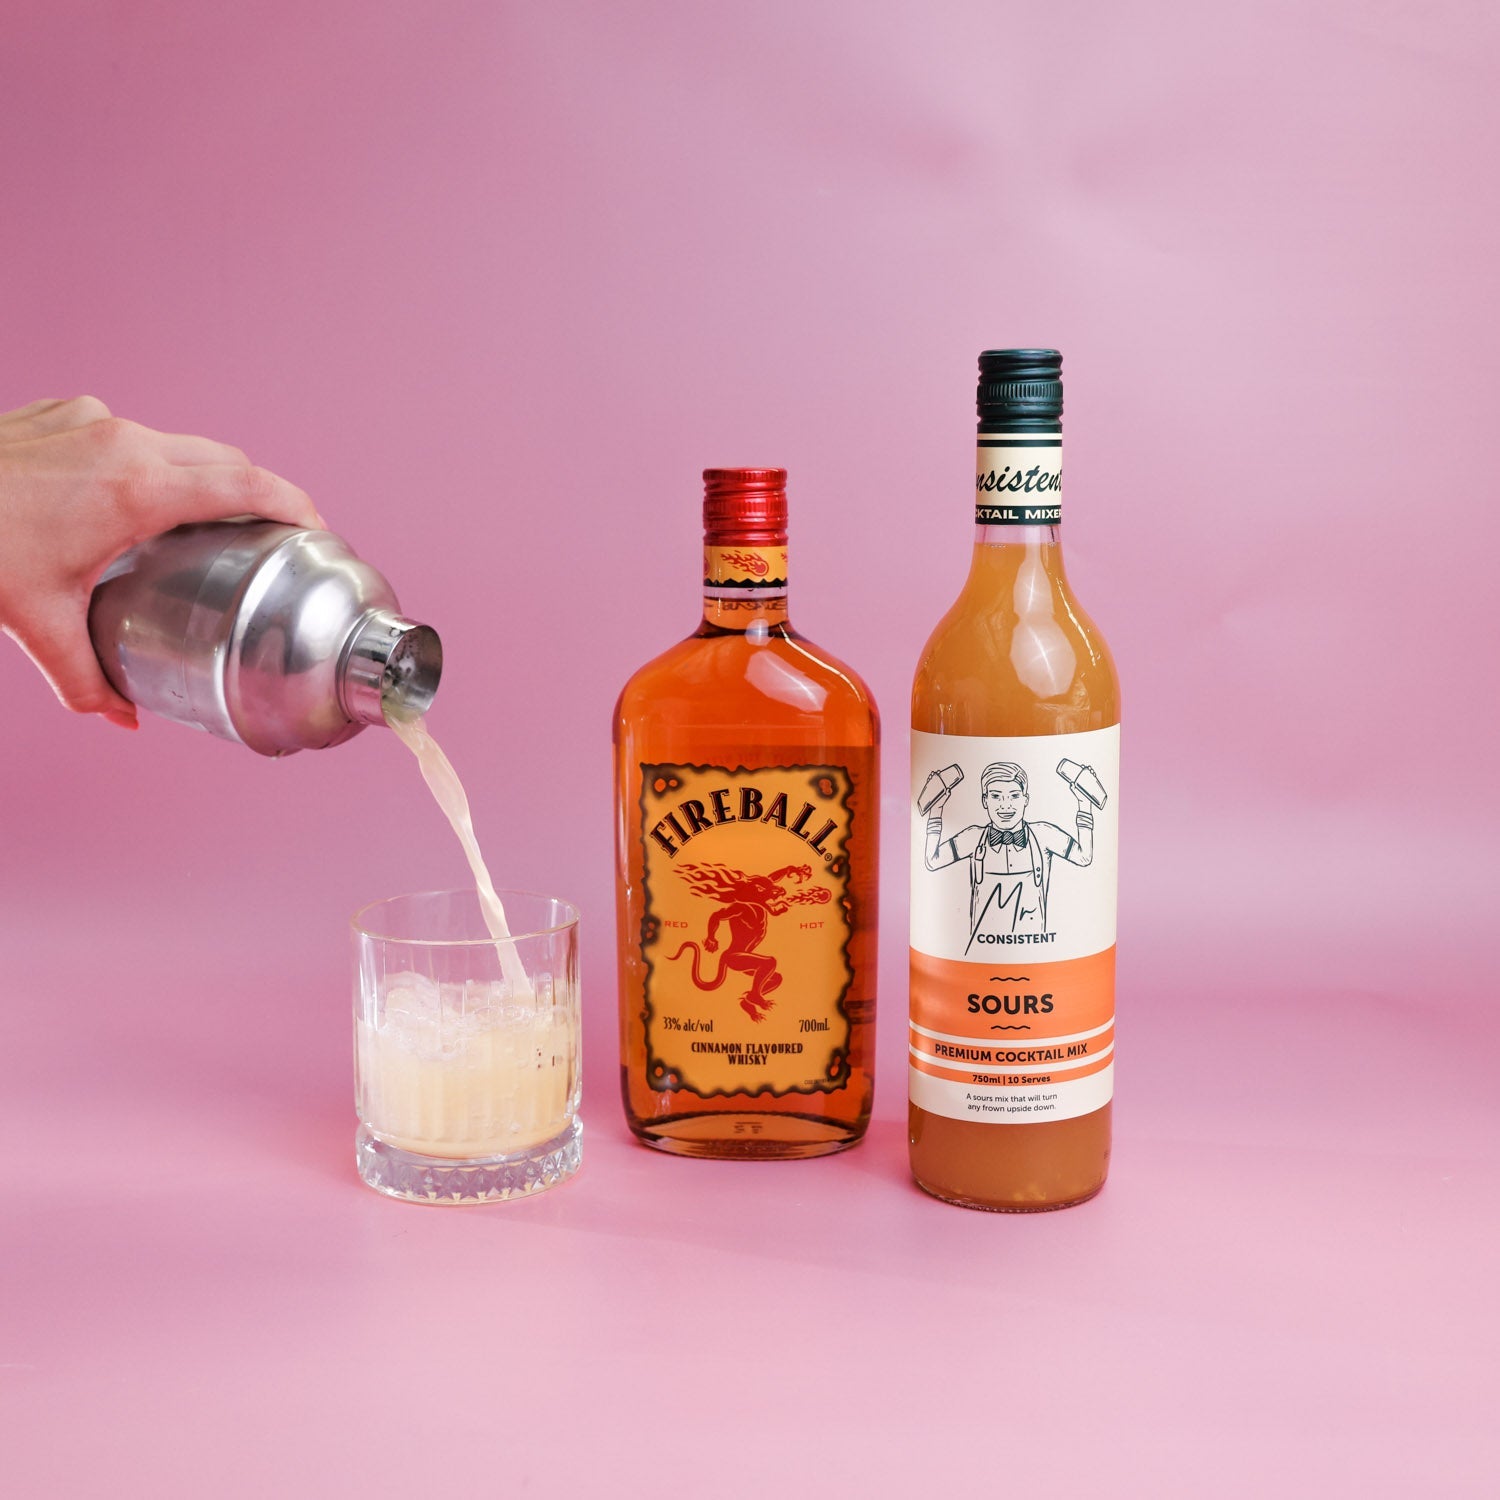 Fireball Sours Gift Pack - Booze Included! - Mr. Consistent